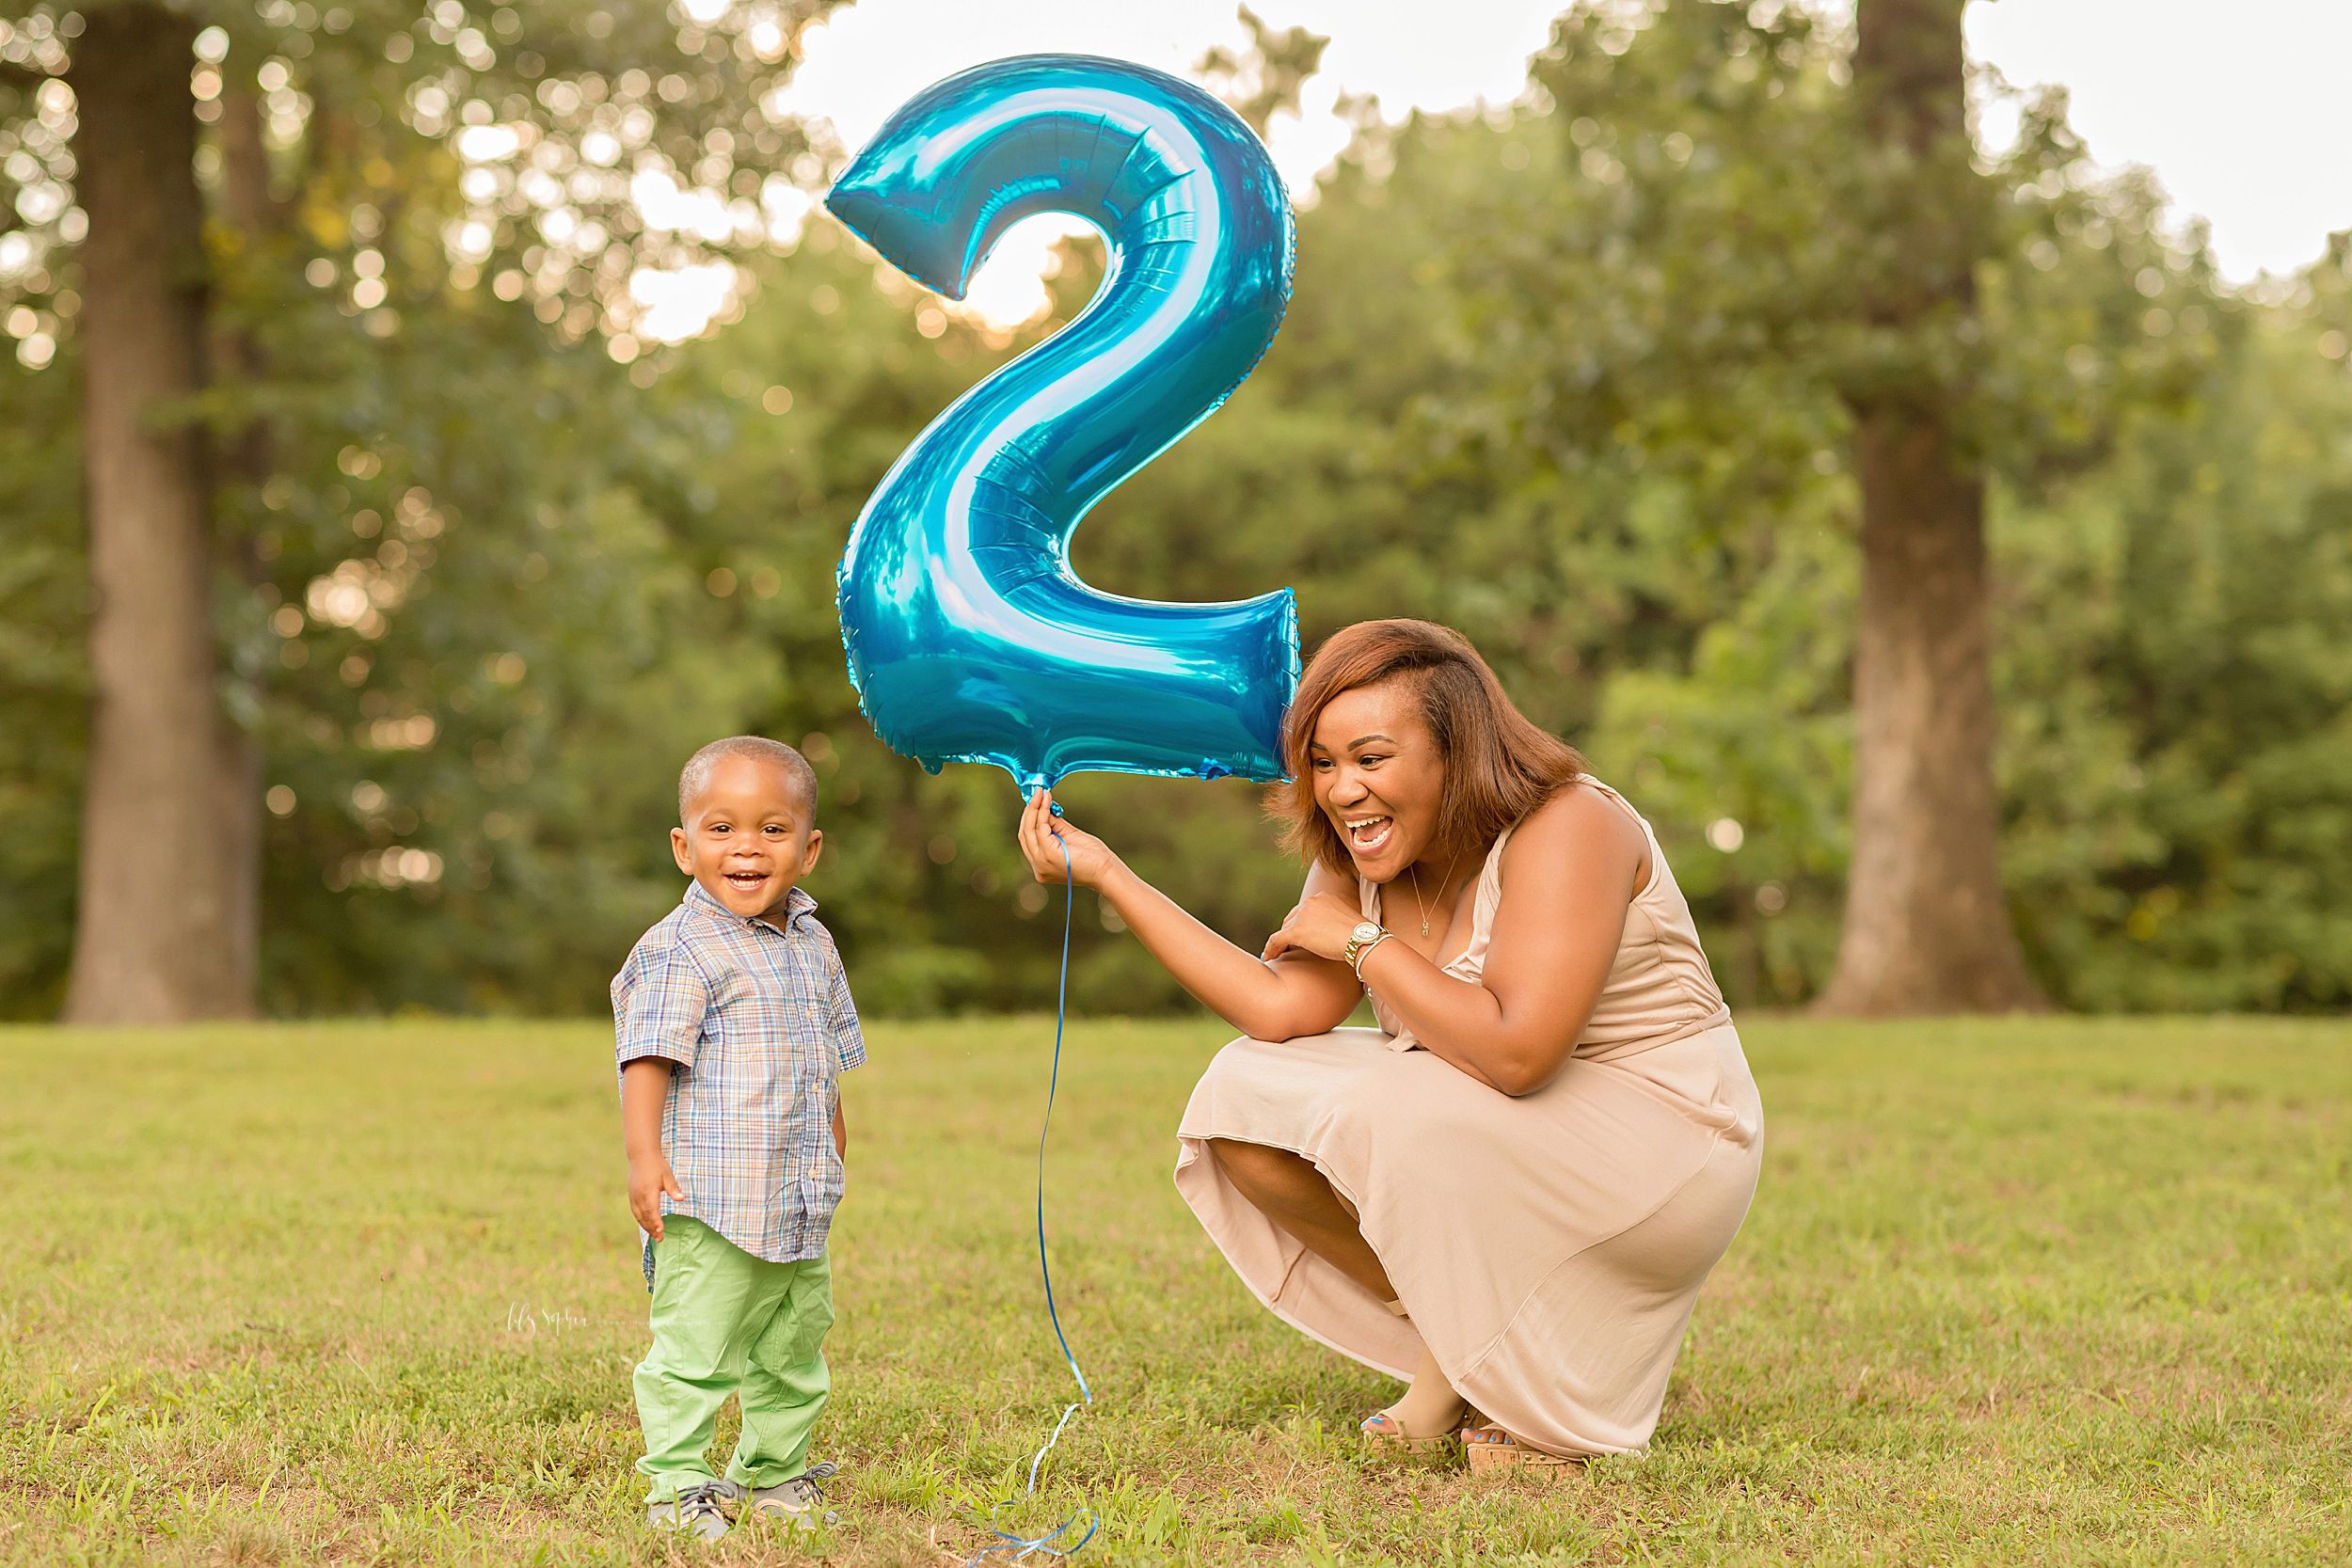  Photo of an African American mom and her son celebrating his two year old birthday in an Atlanta park.  Mom is squatting down in a taupe sleeveless dress holding a blue number two balloon.  Her son is standing next to her in a blue and tan plaid but